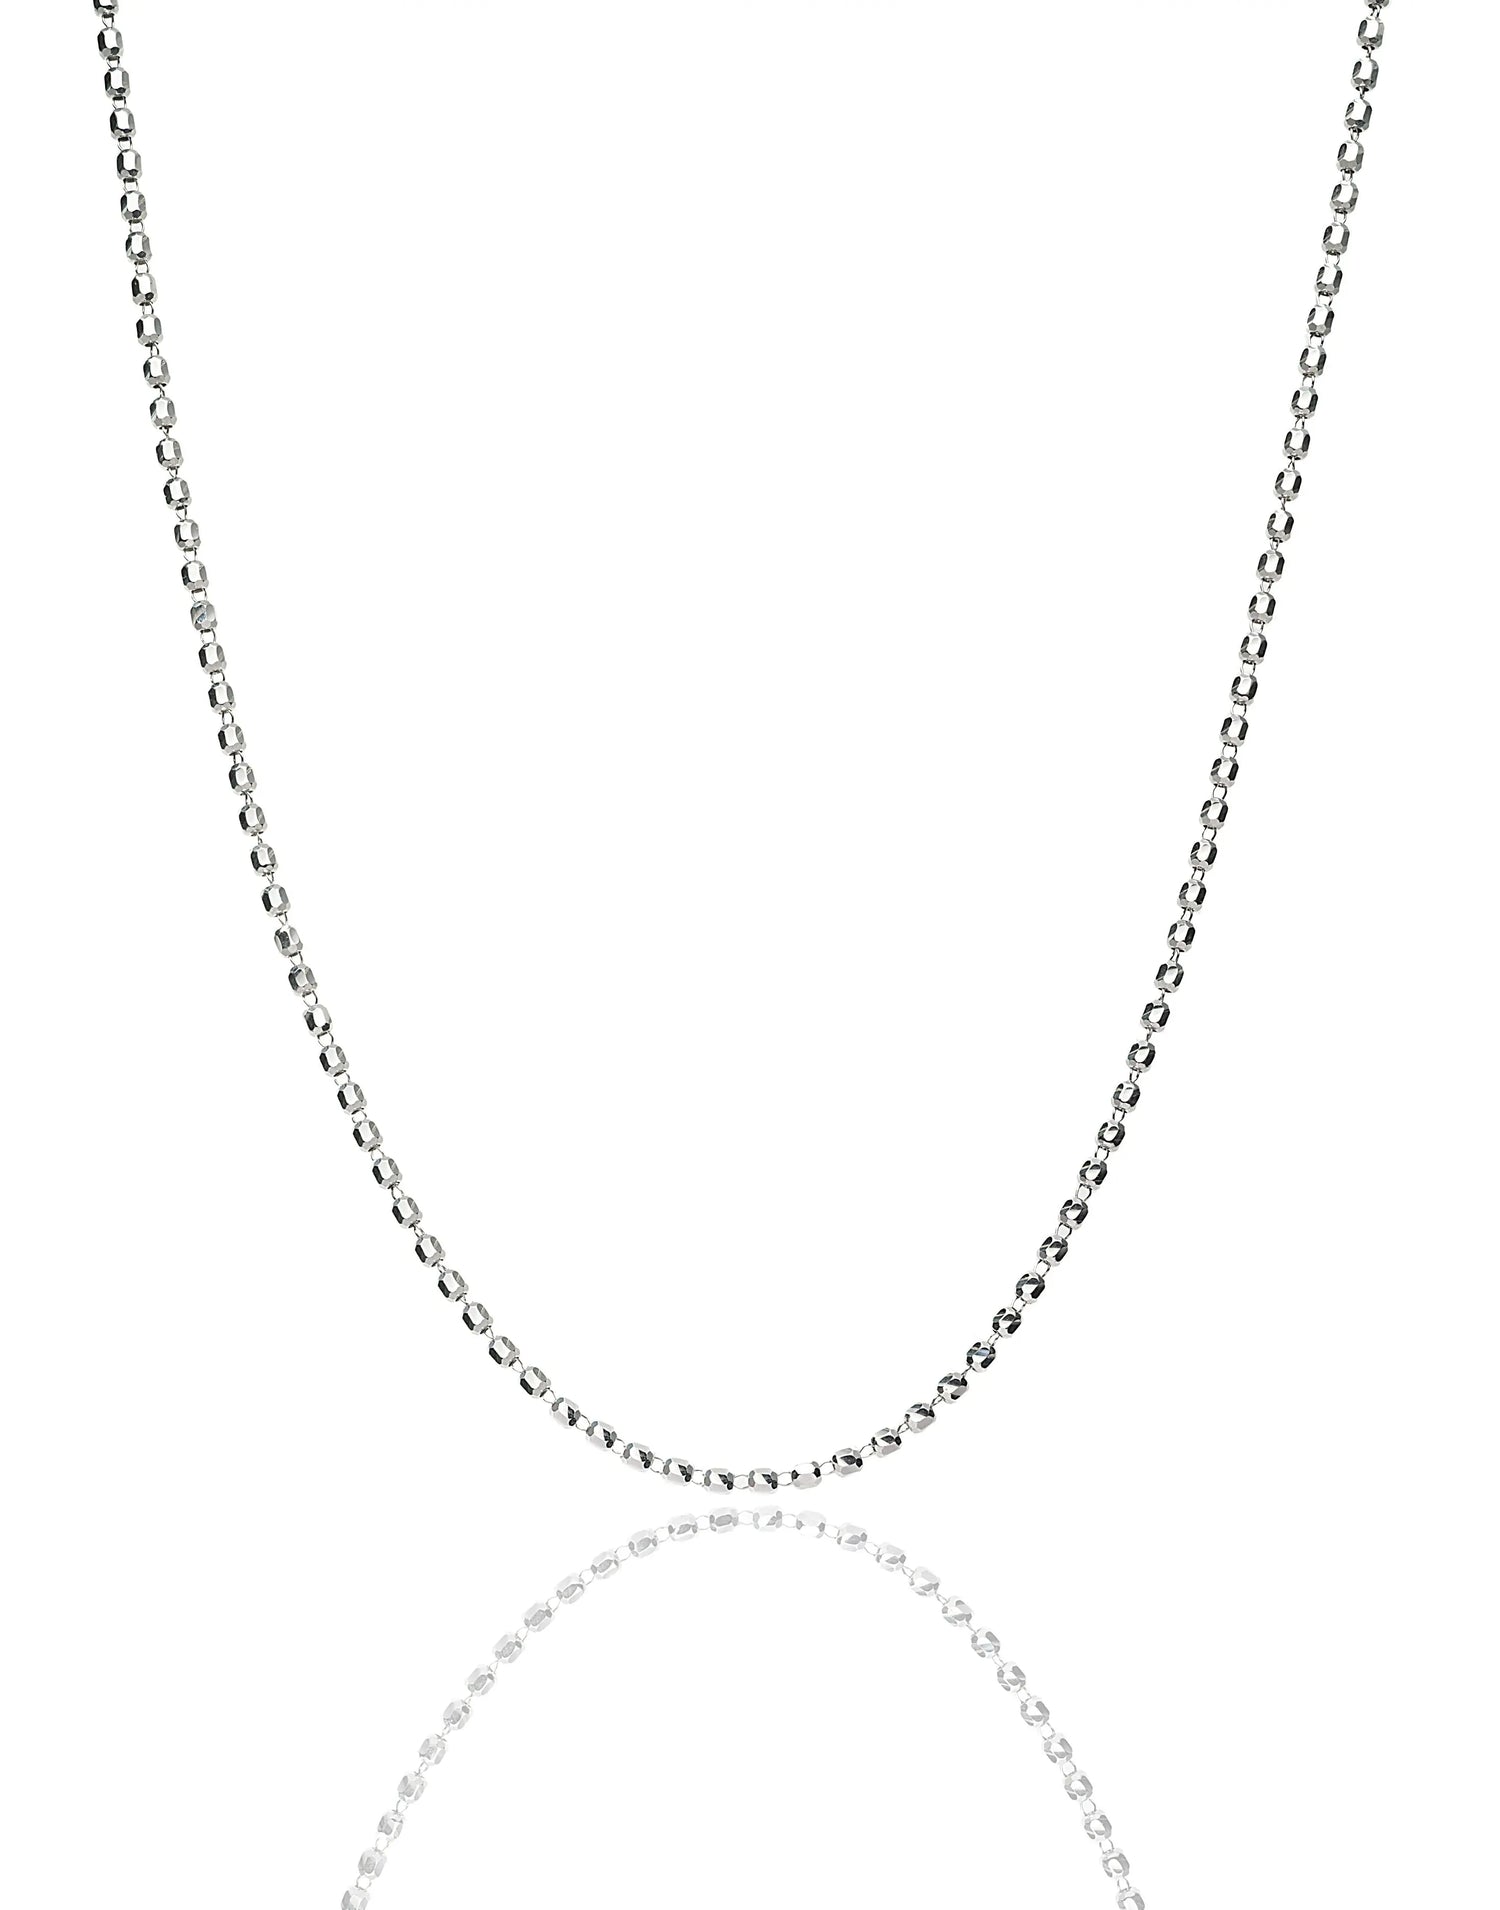 Simply put, the Radiance necklace exudes elegance in a classic style and diamond-like sparkle. Its made from shimmering platinum beads, so its beautiful sparkle is inherent. The 16-18" length lays beautifully across the décolleté as an effortlessly sophisticated everyday piece.     Product Details:    Platinum Spring Ring Clasp 16-18 Inches (Adjustable)